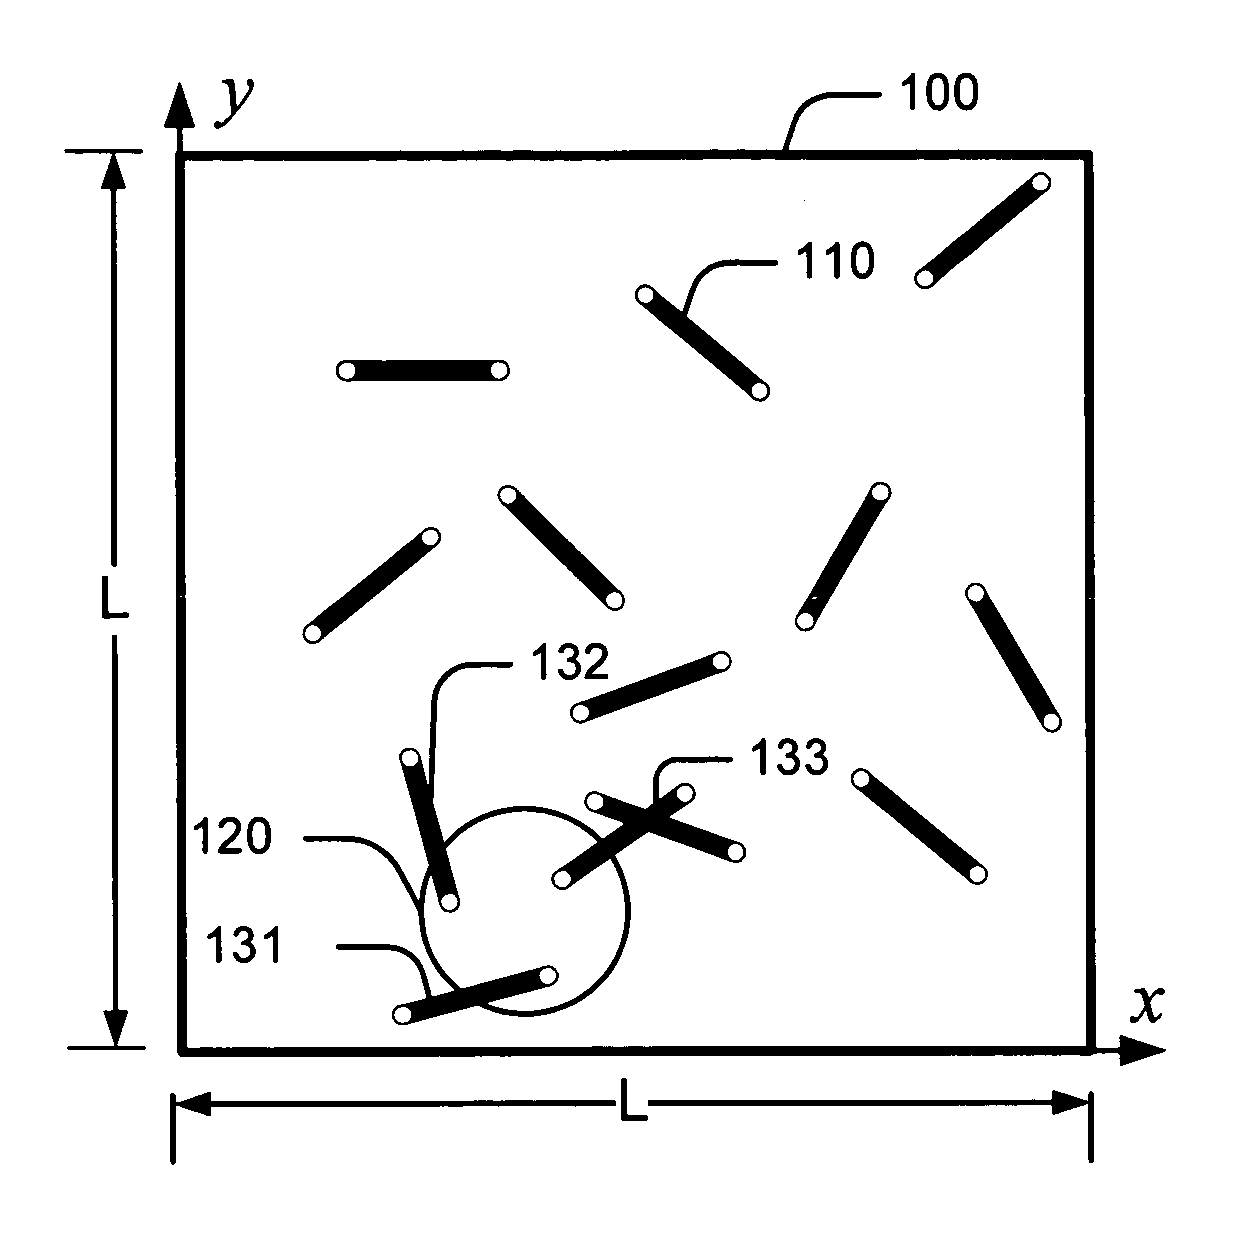 Systems and methods for encoding randomly distributed features in an object